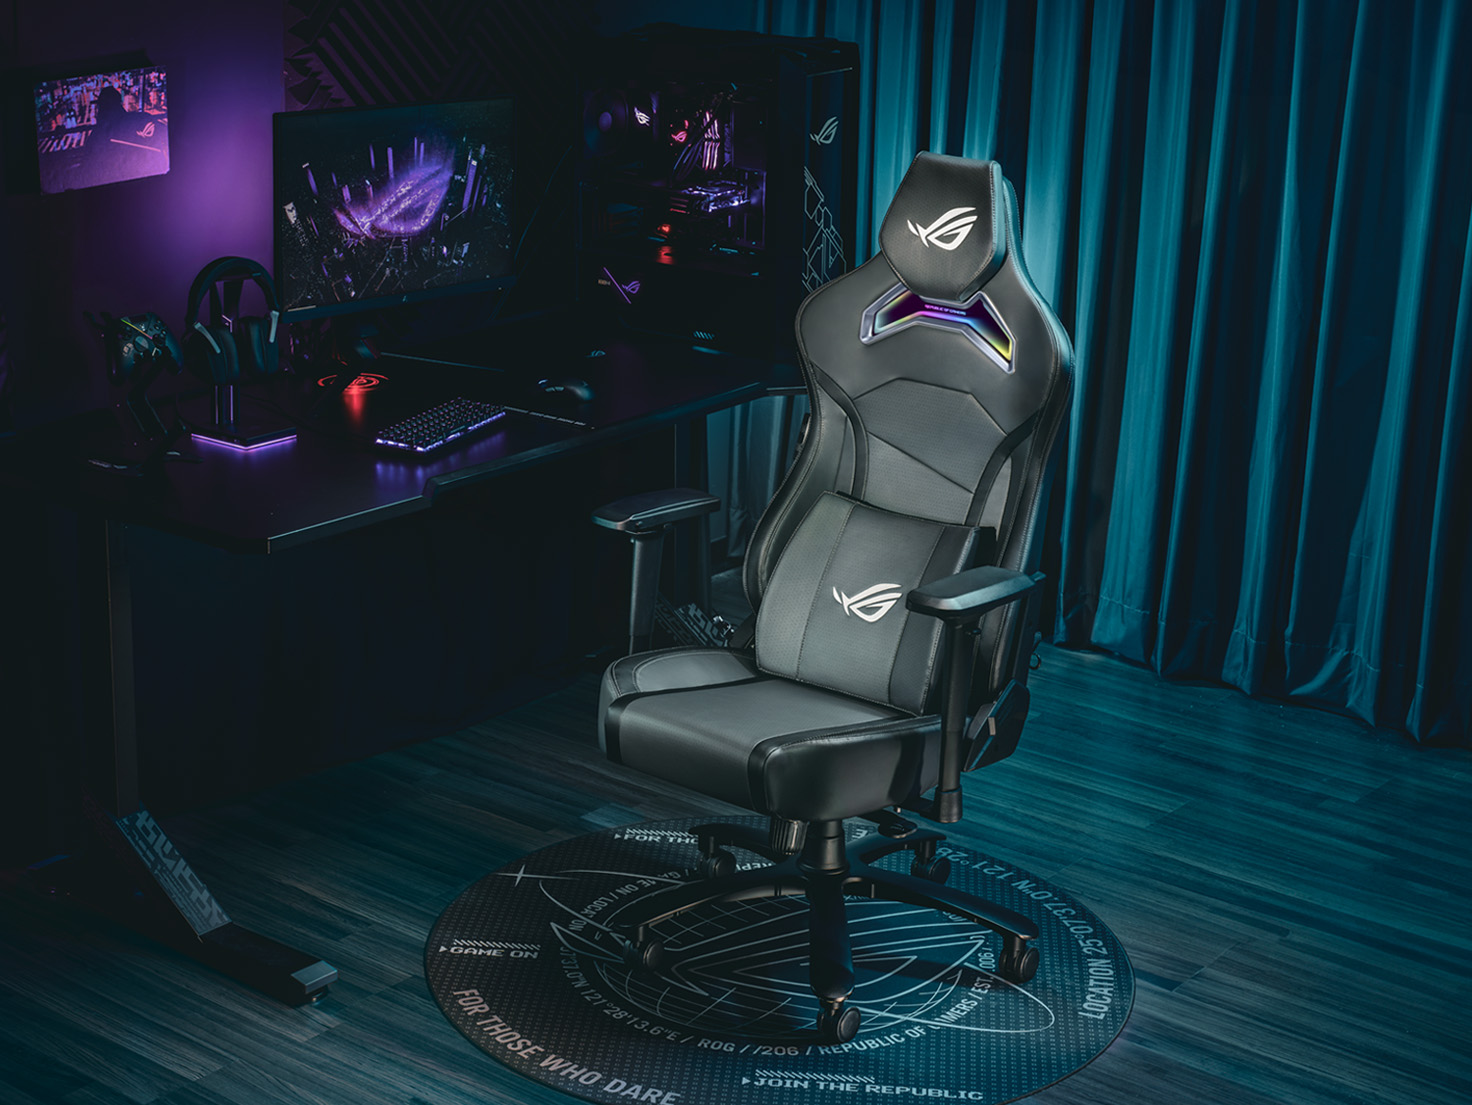 ROG Chariot X gaming chair front view to the left in a gaming room setting